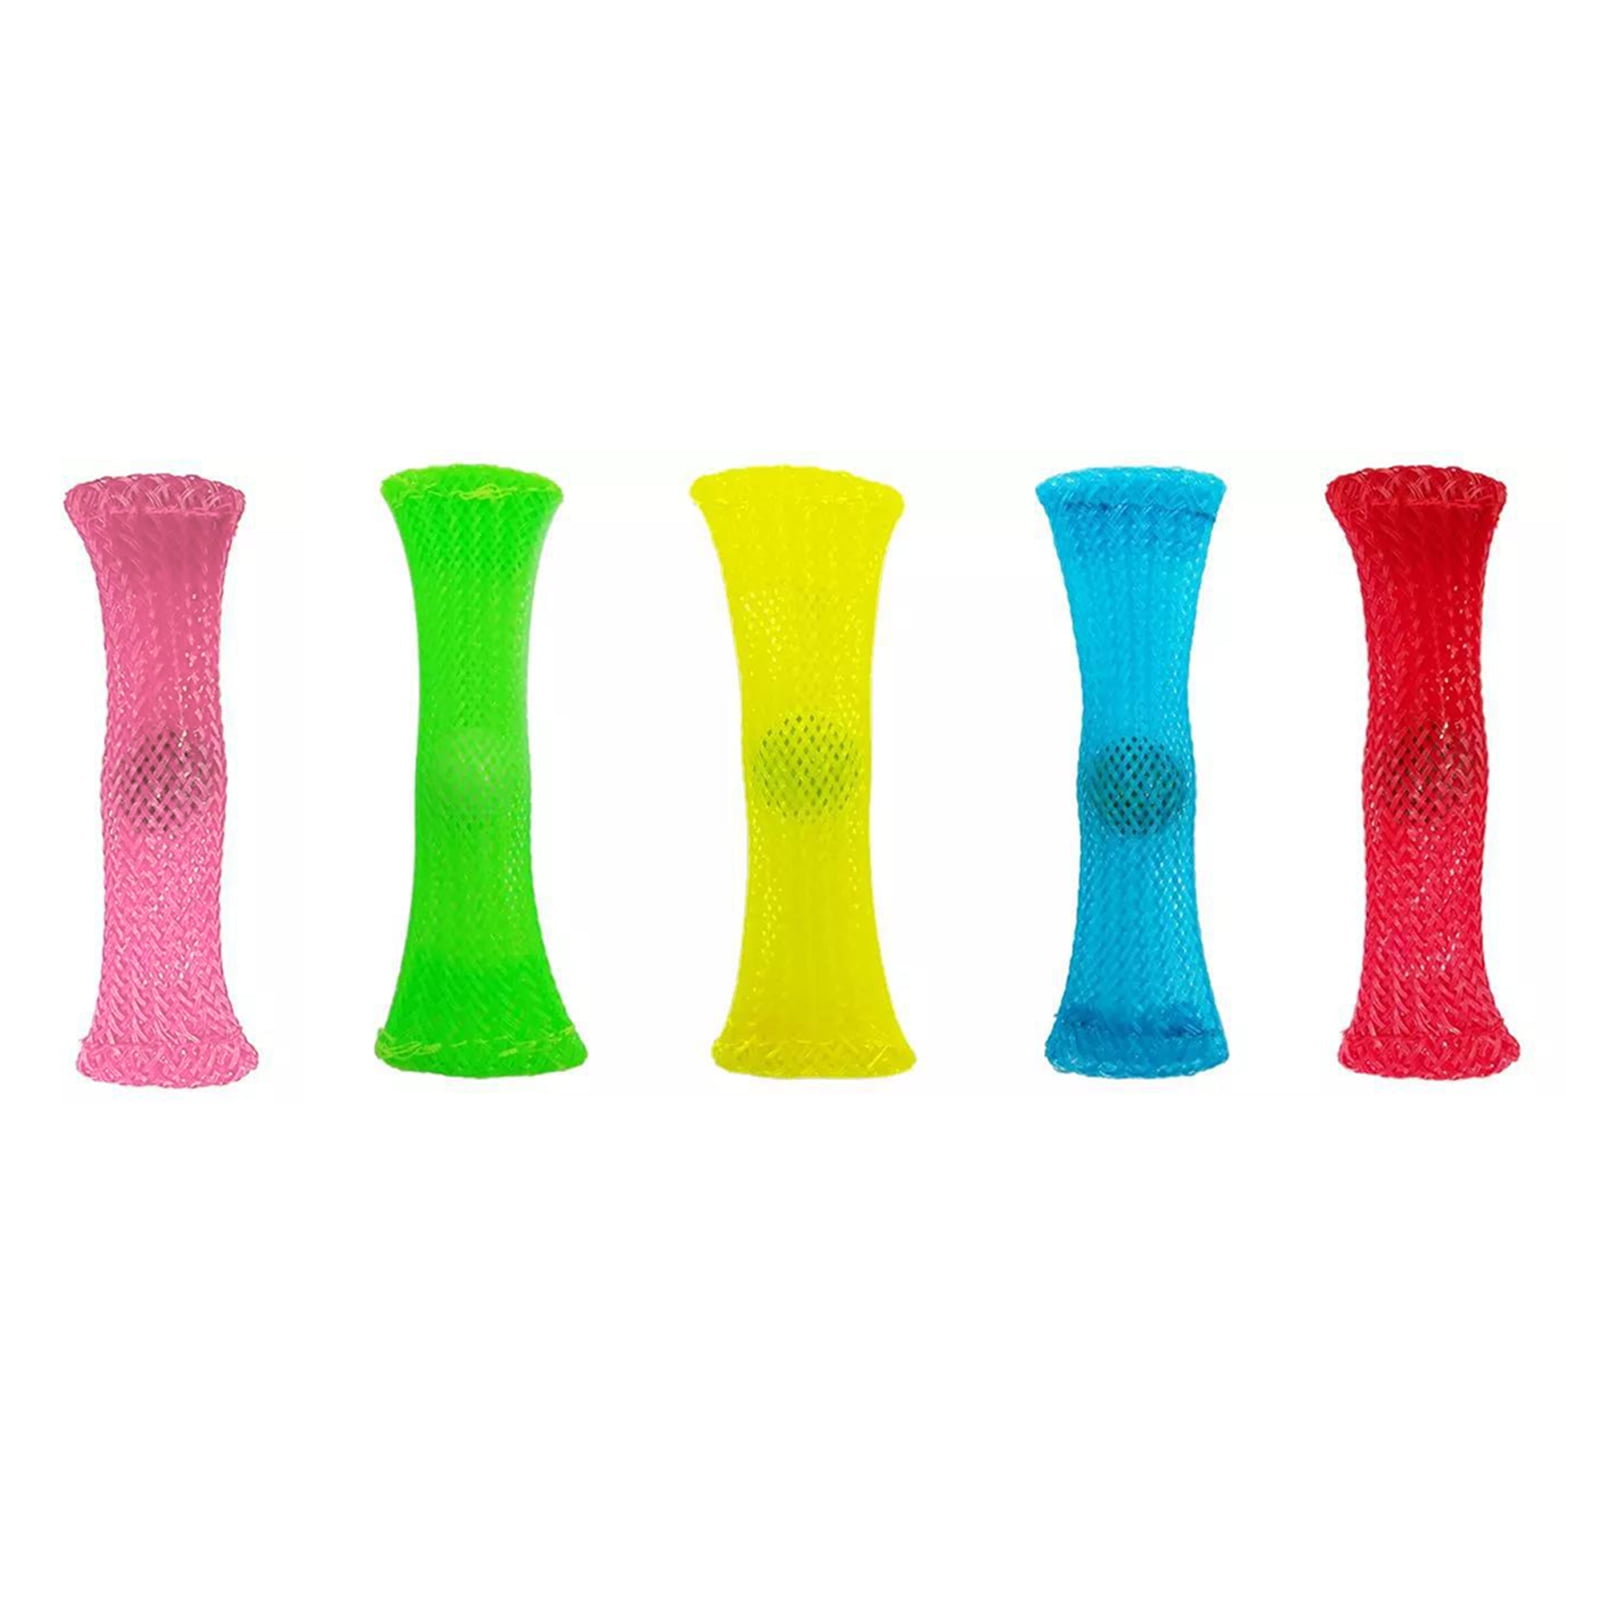 Details about   Mesh Marble Tube Fidget Toy Stress Anxiety Relief Adults Kids Soothing Sensory = 